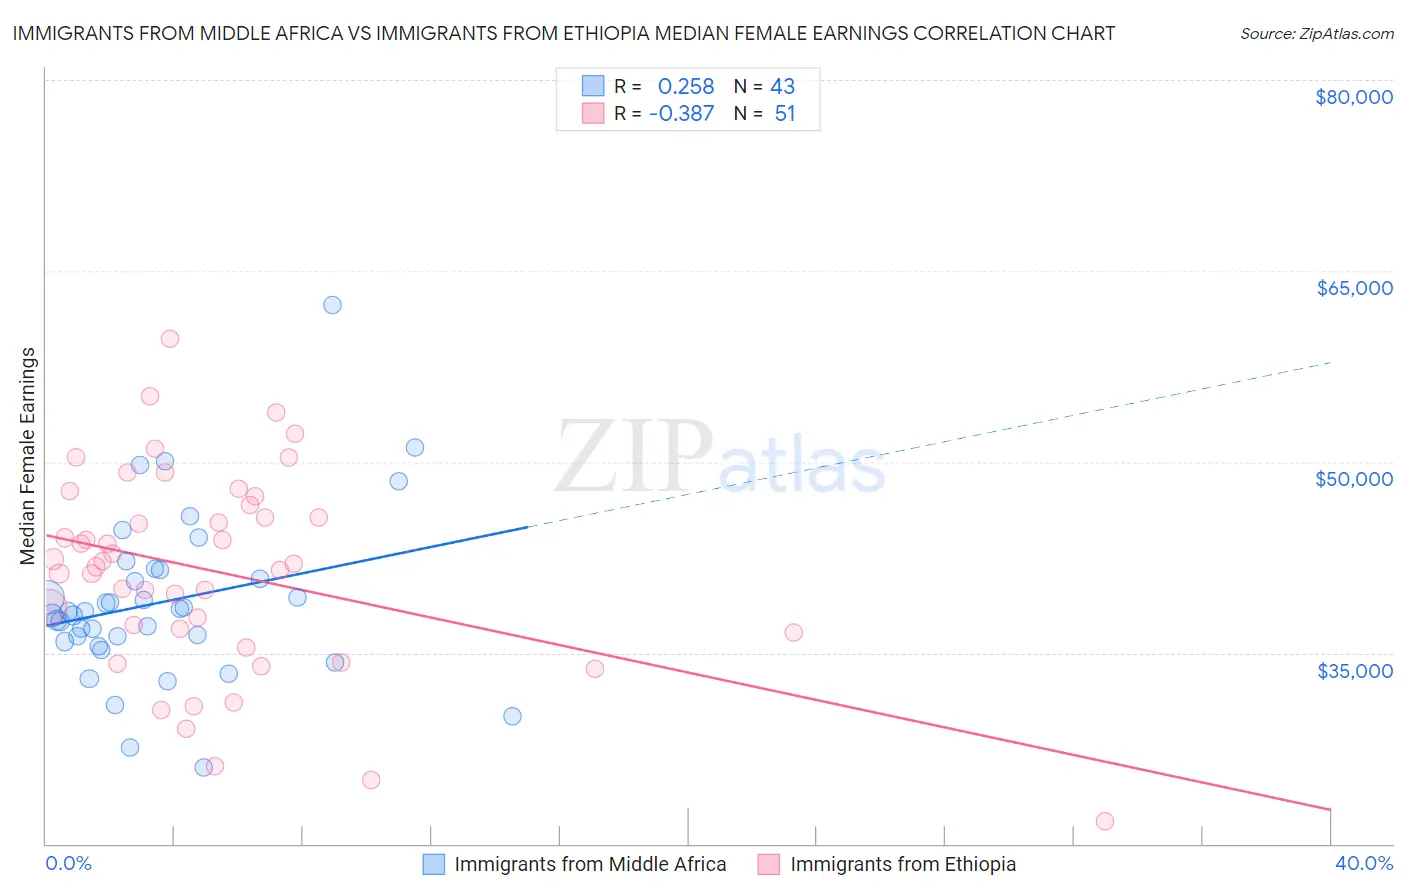 Immigrants from Middle Africa vs Immigrants from Ethiopia Median Female Earnings